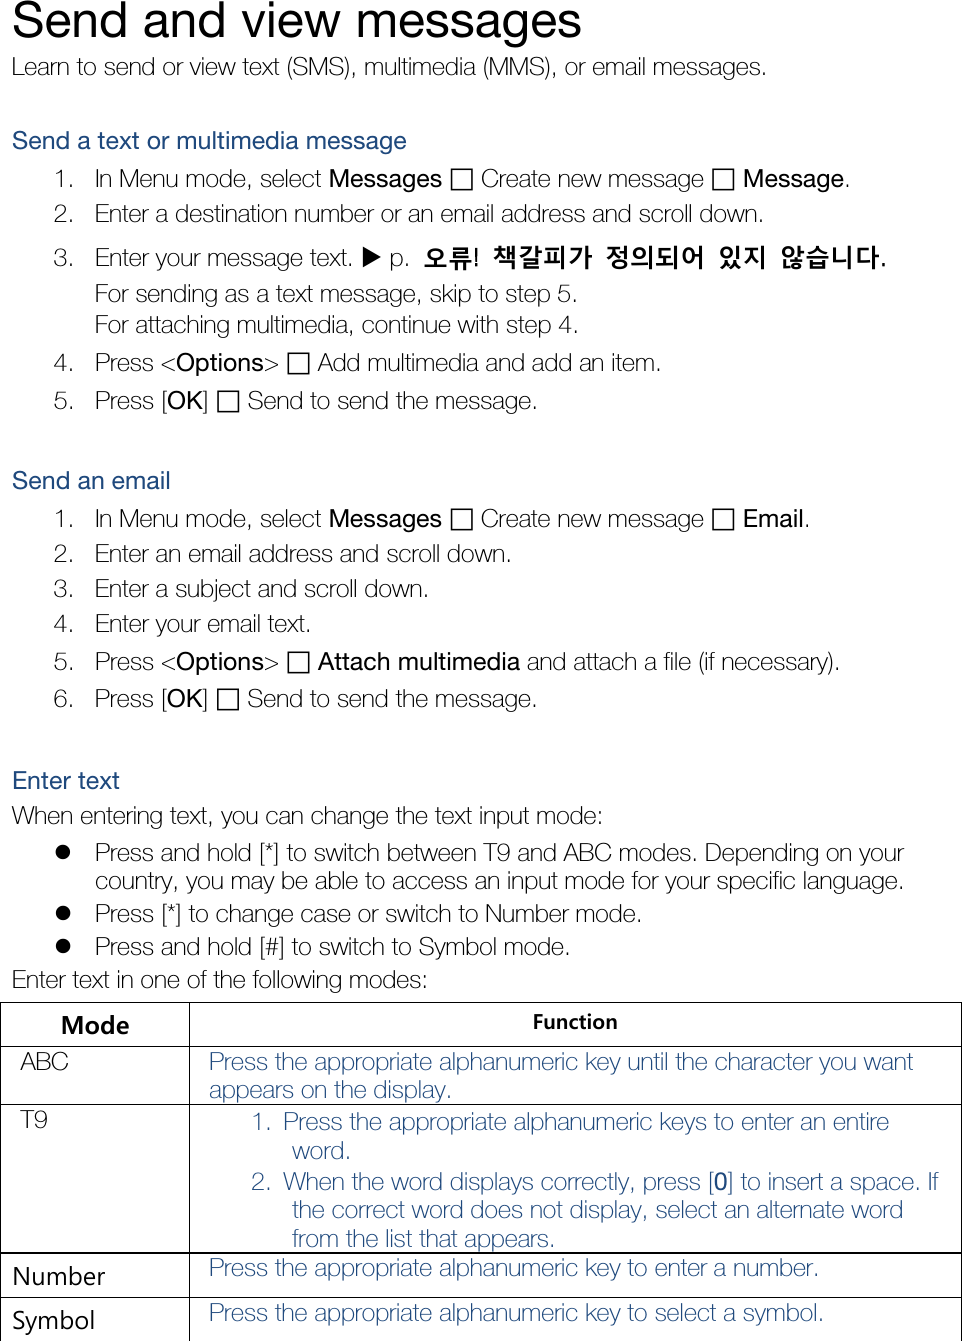  Send and view messages Learn to send or view text (SMS), multimedia (MMS), or email messages.  Send a text or multimedia message 1. In Menu mode, select Messages ฀ Create new message ฀ Message. 2. Enter a destination number or an email address and scroll down. 3. Enter your message text.  p.  오류!  책갈피가 정의되어 있지 않습니다. For sending as a text message, skip to step 5. For attaching multimedia, continue with step 4. 4. Press &lt;Options&gt; ฀ Add multimedia and add an item. 5. Press [OK] ฀ Send to send the message.  Send an email 1. In Menu mode, select Messages ฀ Create new message ฀ Email. 2. Enter an email address and scroll down. 3. Enter a subject and scroll down. 4. Enter your email text. 5. Press &lt;Options&gt; ฀ Attach multimedia and attach a file (if necessary). 6. Press [OK] ฀ Send to send the message.  Enter text When entering text, you can change the text input mode:  Press and hold [*] to switch between T9 and ABC modes. Depending on your country, you may be able to access an input mode for your specific language.  Press [*] to change case or switch to Number mode.  Press and hold [#] to switch to Symbol mode. Enter text in one of the following modes: Mode Function ABC Press the appropriate alphanumeric key until the character you want appears on the display. T9 1. Press the appropriate alphanumeric keys to enter an entire word. 2. When the word displays correctly, press [0] to insert a space. If the correct word does not display, select an alternate word from the list that appears. Number Press the appropriate alphanumeric key to enter a number. Symbol Press the appropriate alphanumeric key to select a symbol. 